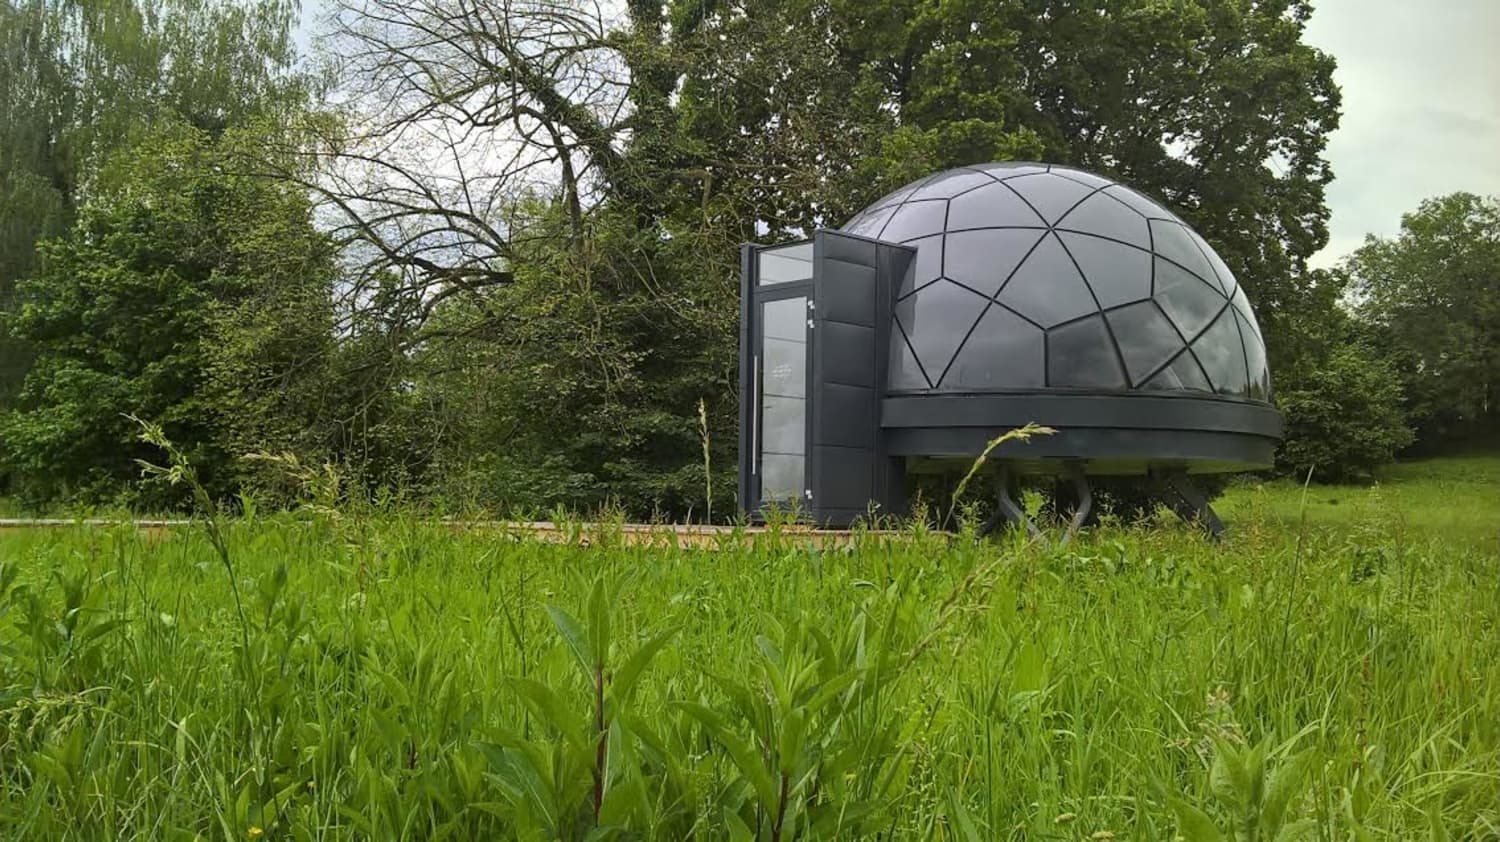 These Mobile Prefab Domes Are Inspired by Camping